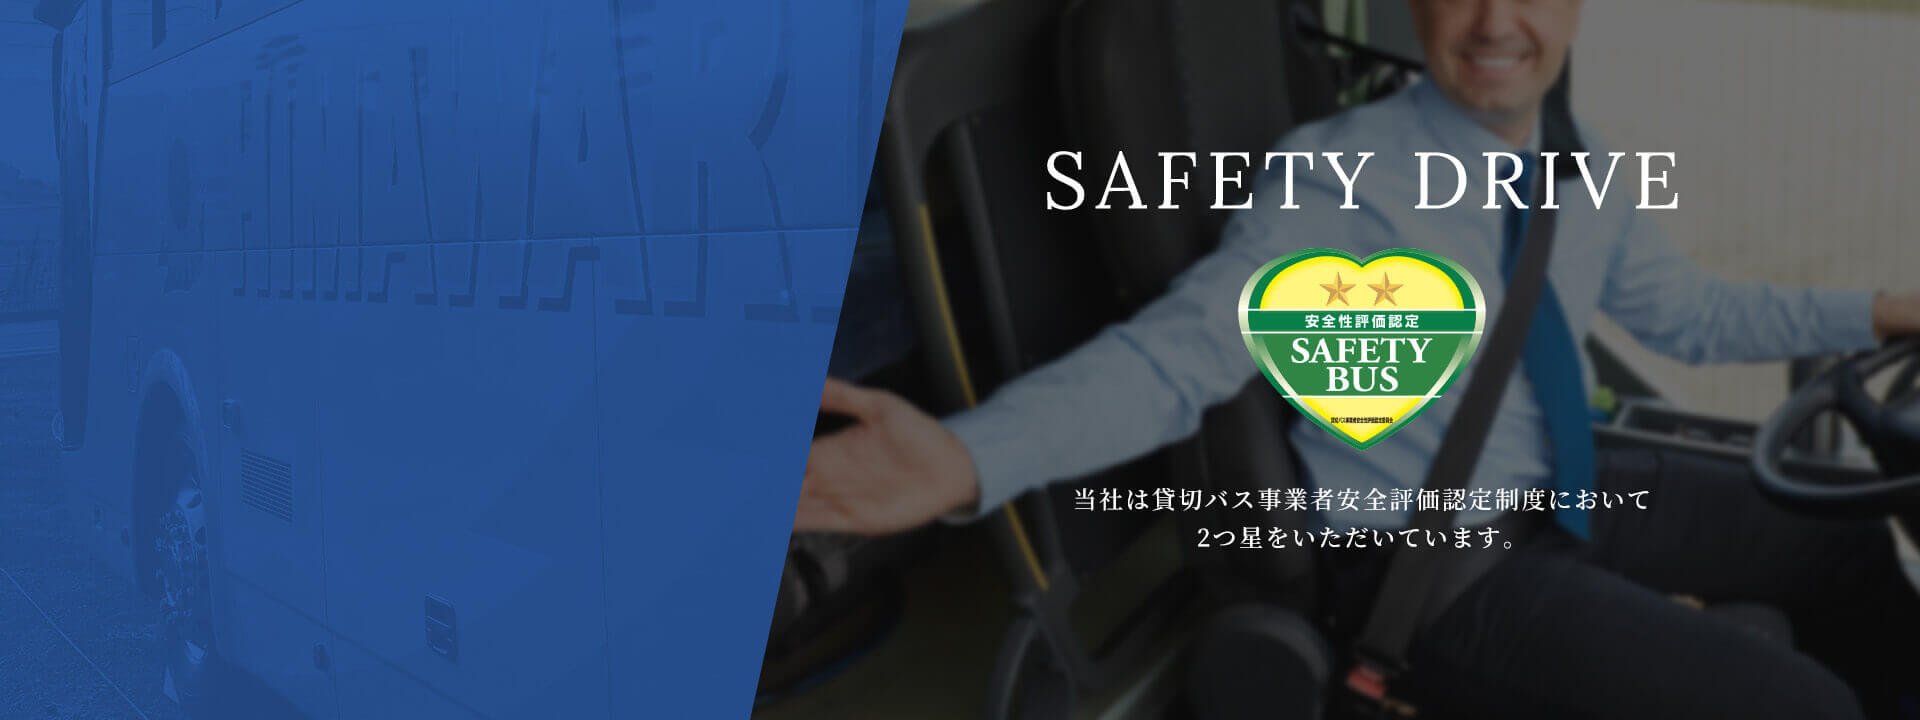 SAFETY DRIVE